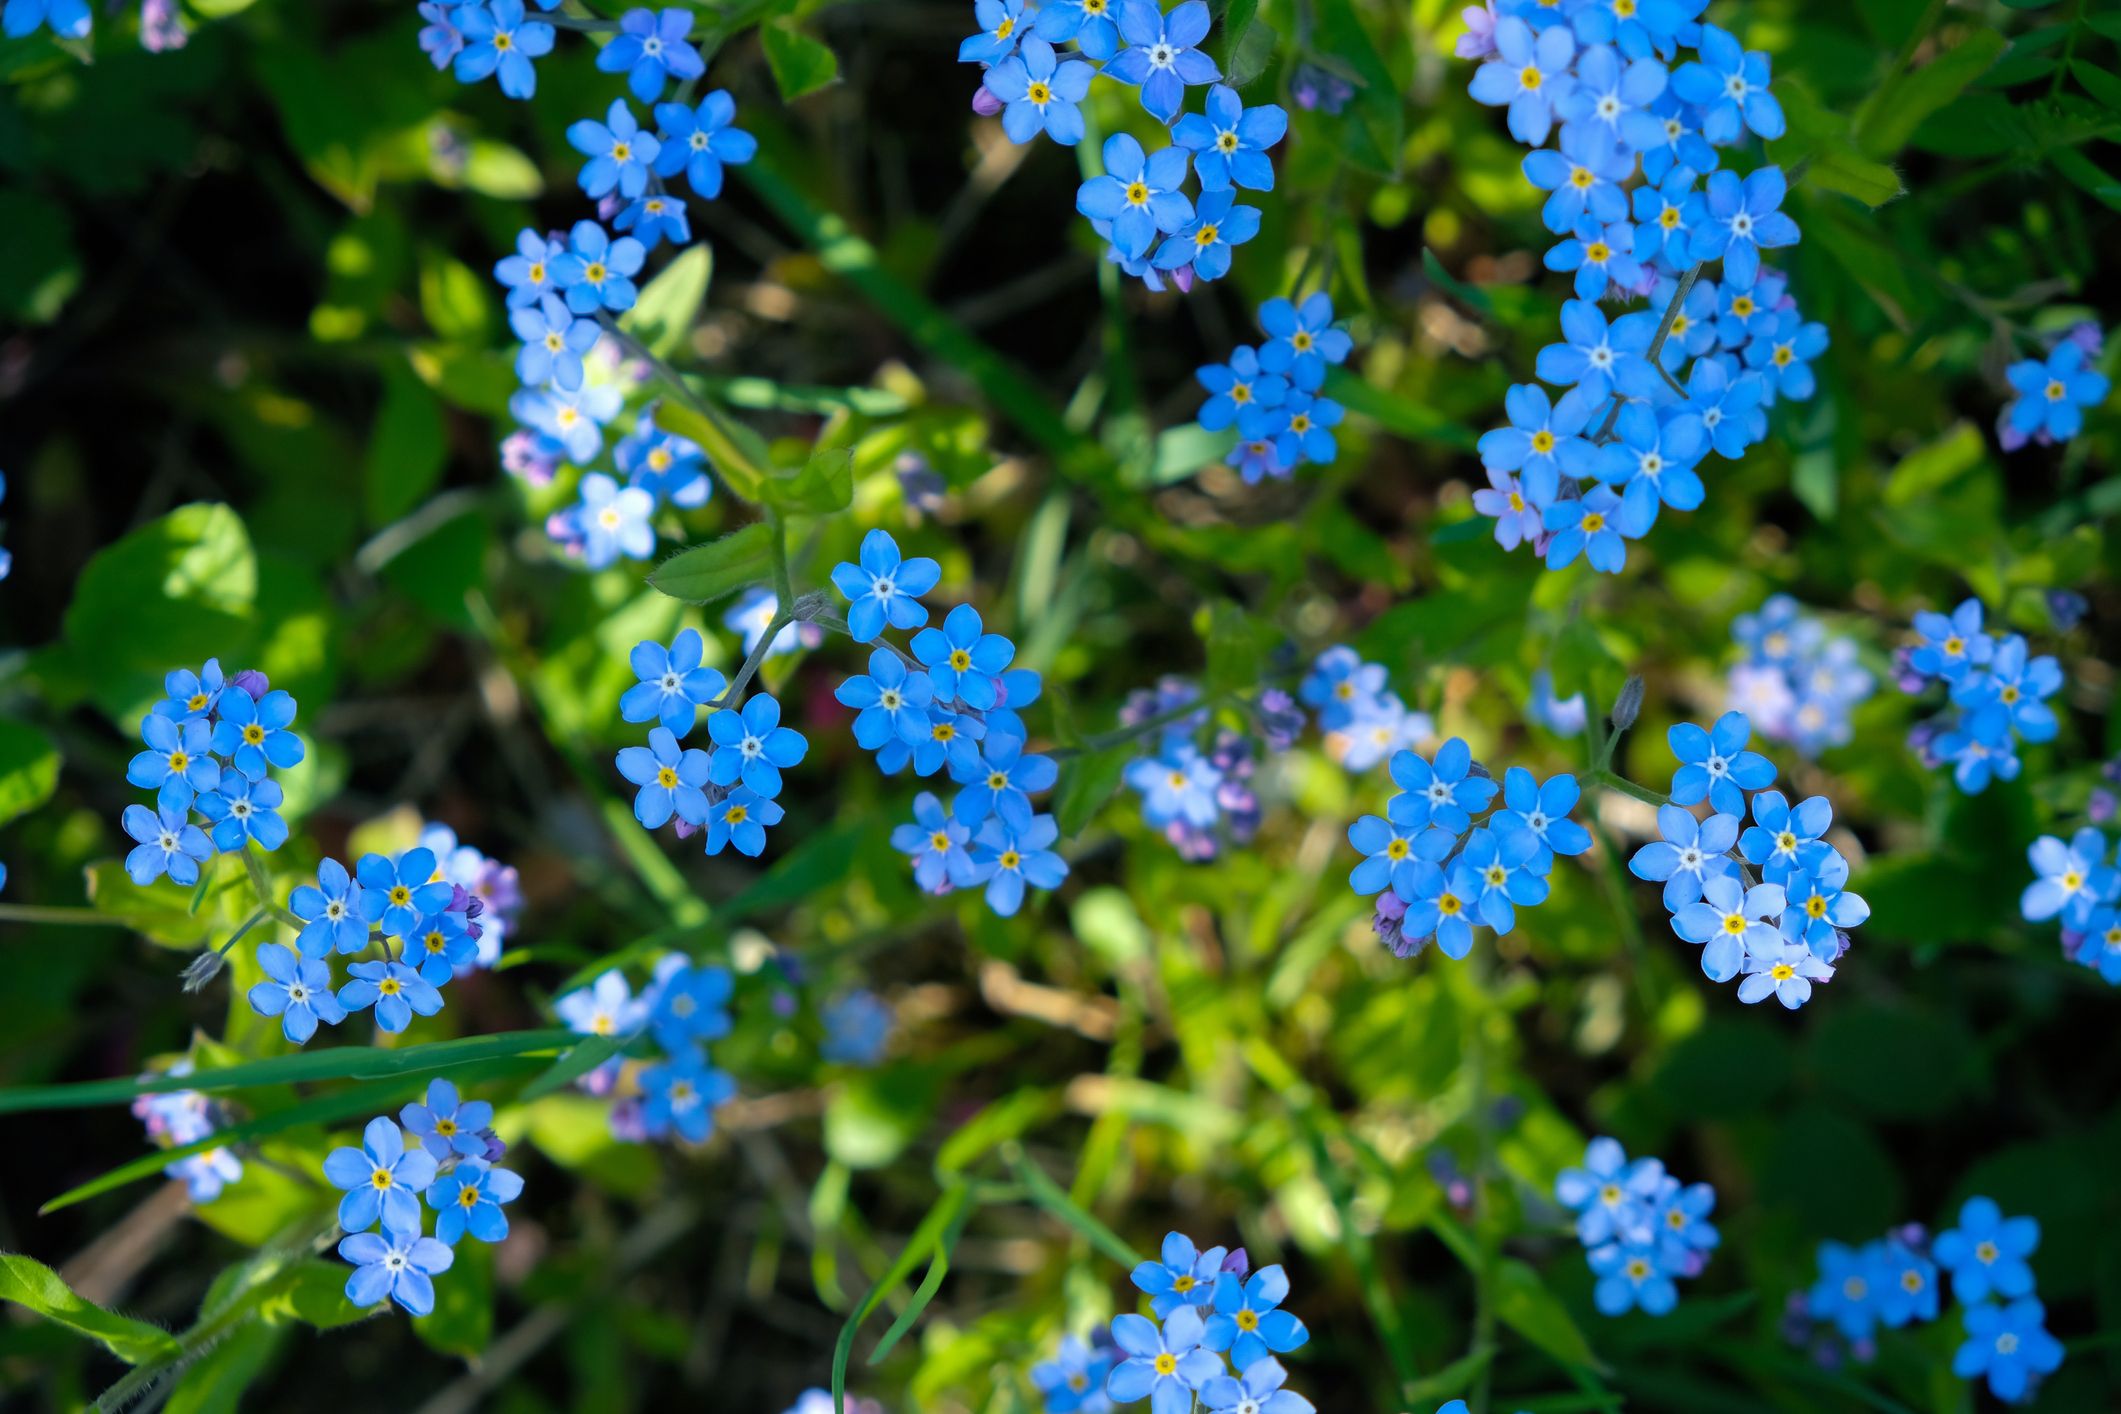 How to Plant, Grow, and Care for Forget-Me-Not Flowers